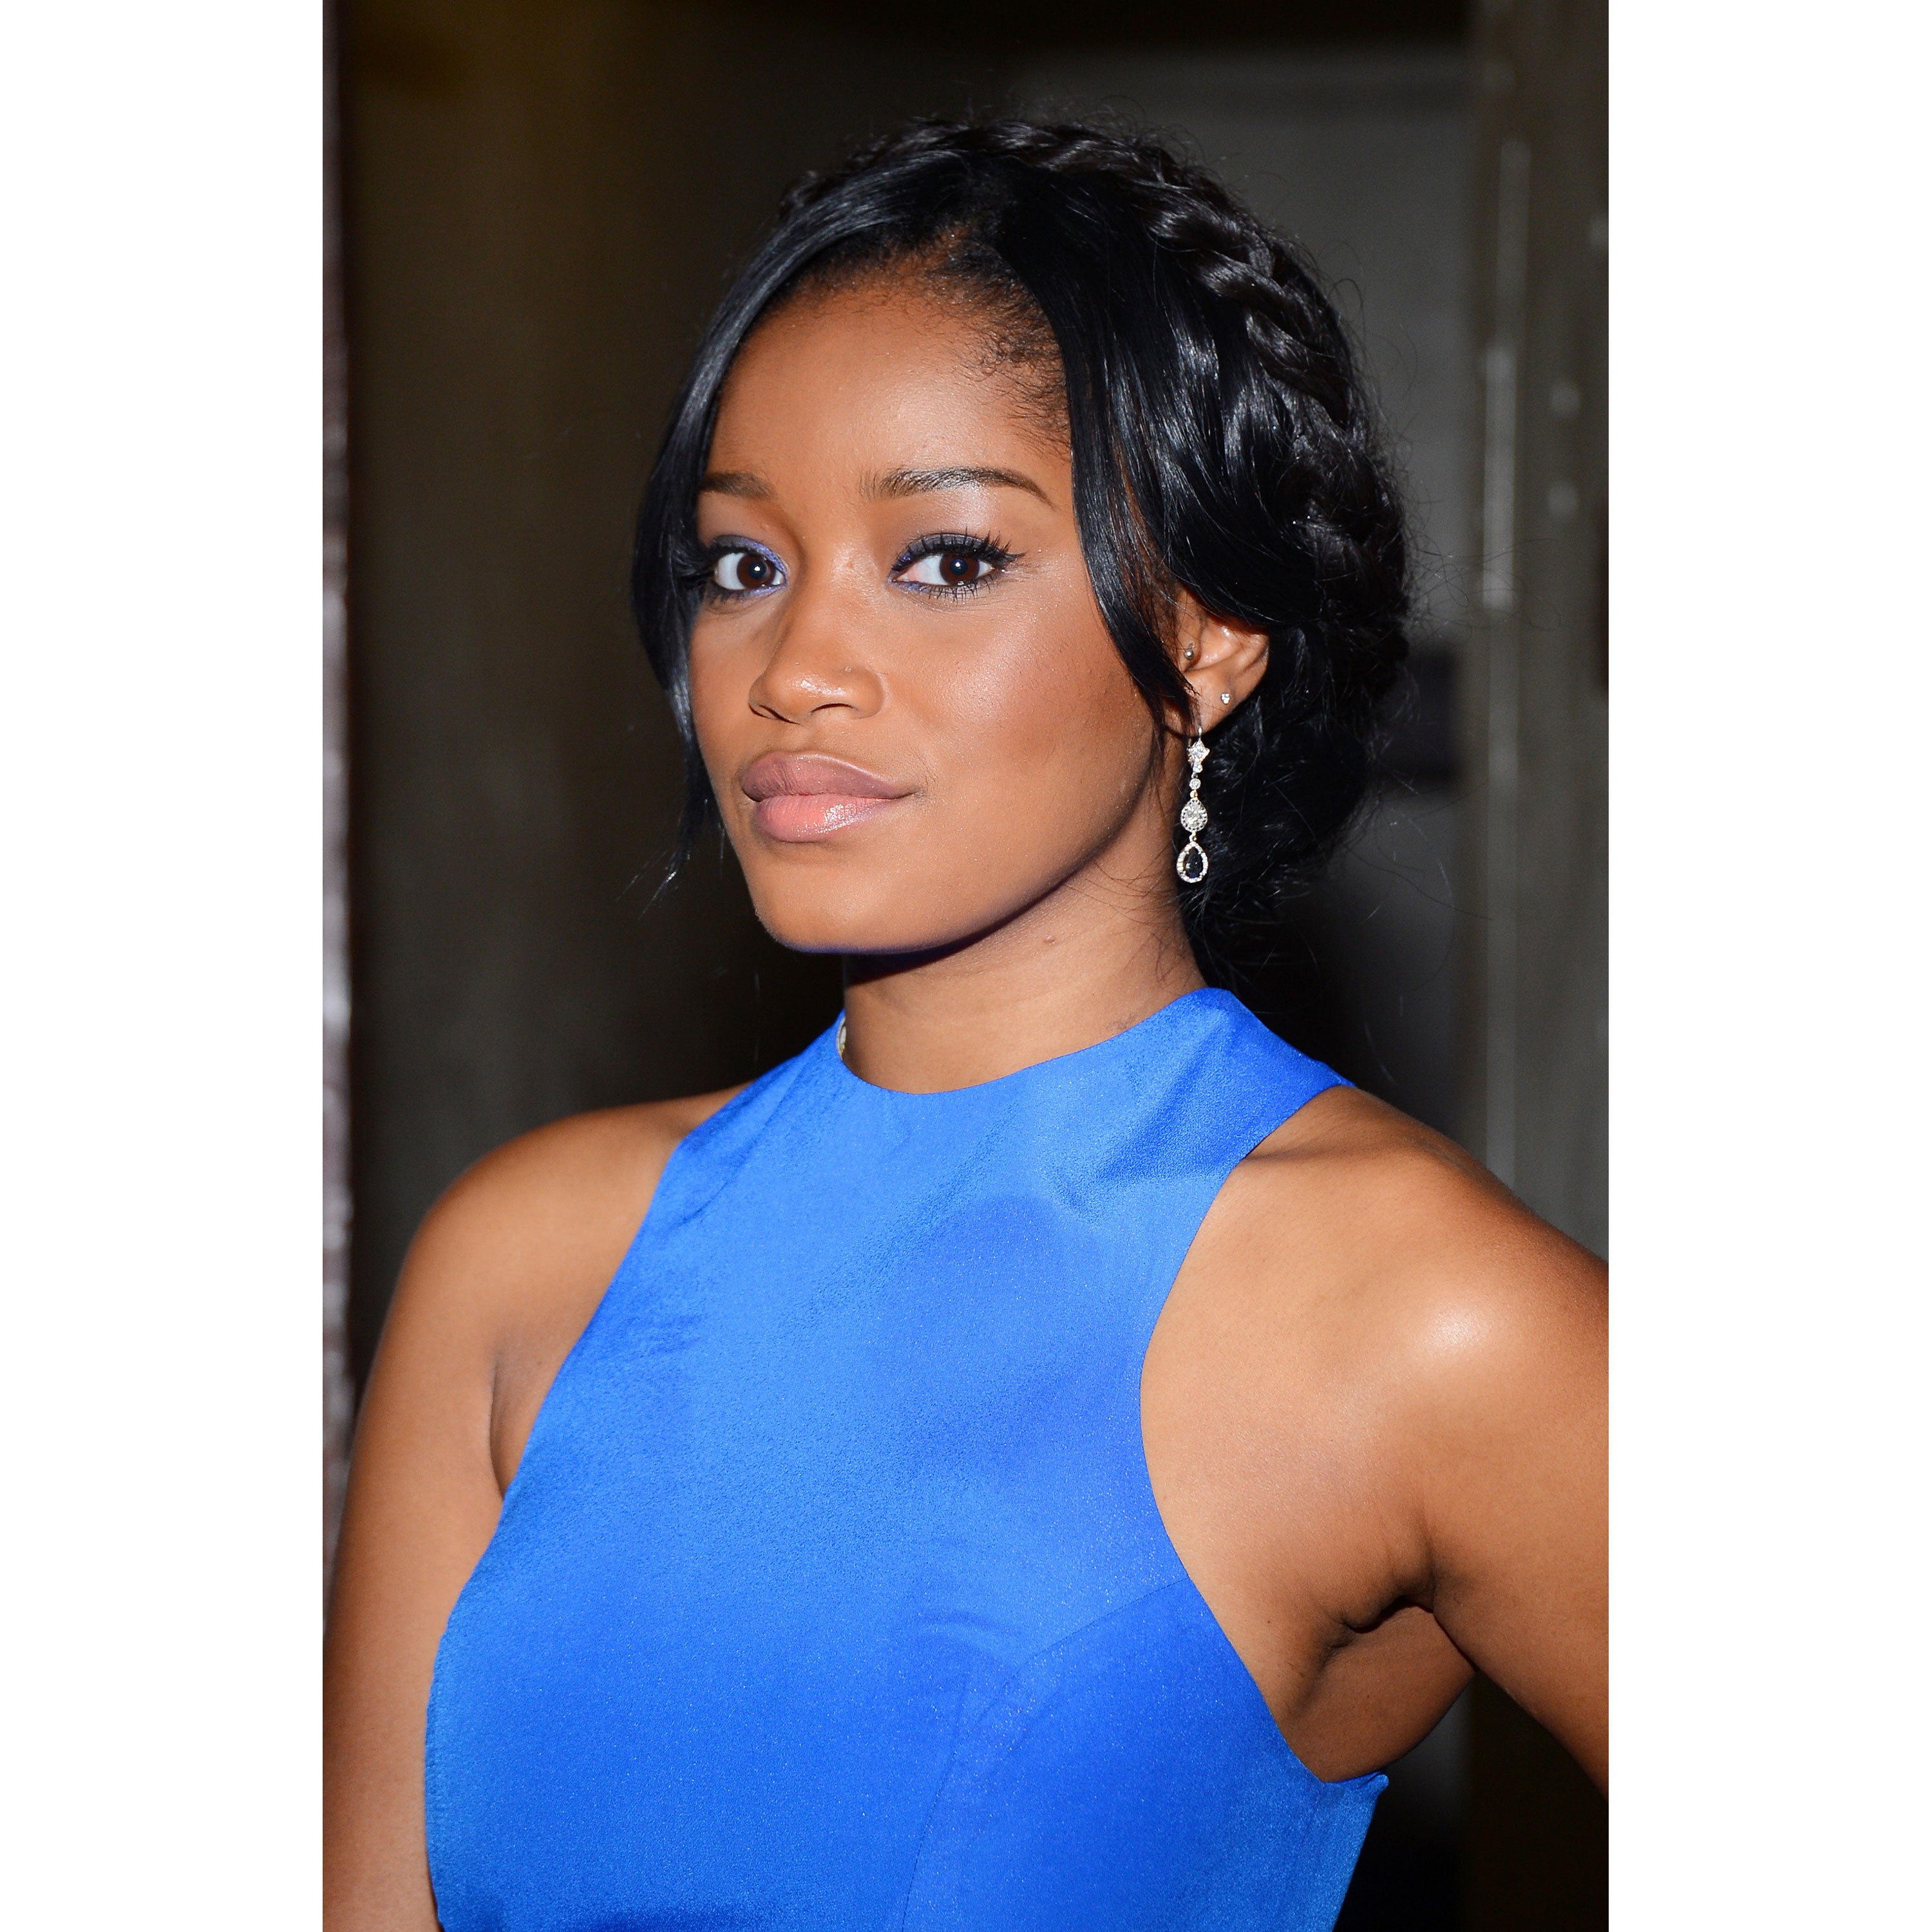 Keke Palmer Turns Up the Heat in 'You Got Me' Video
